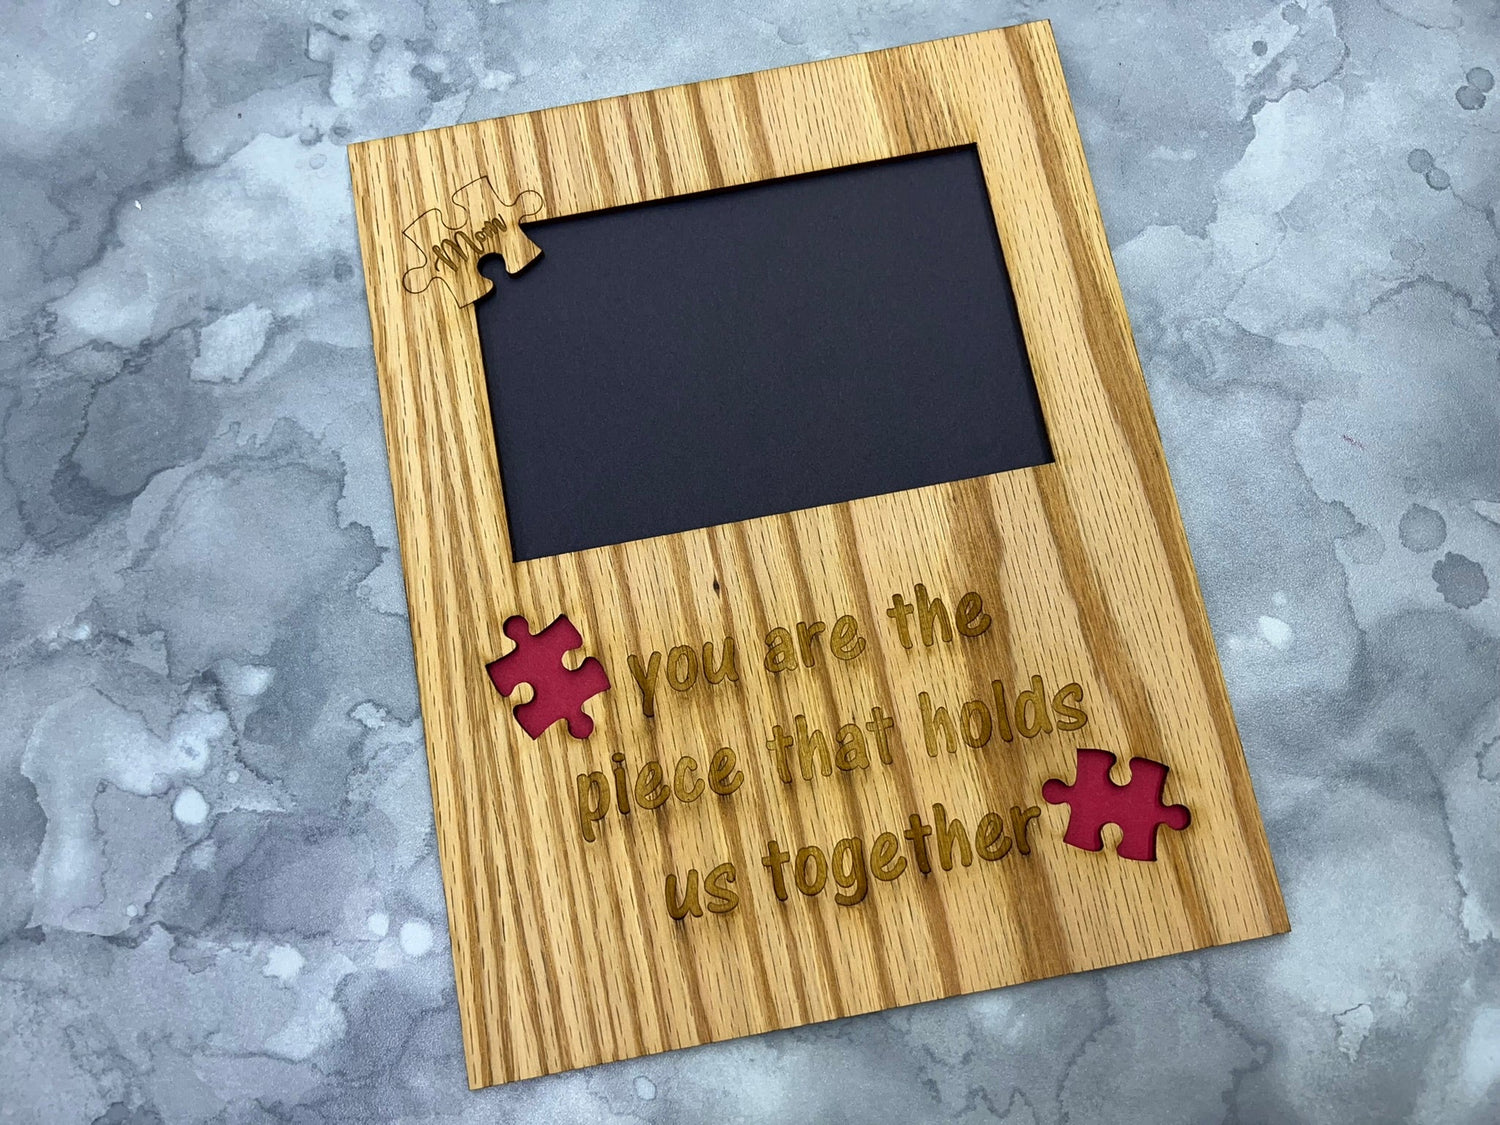 Mom - Piece That Holds Us Together Picture Frame - Legacy Images - 